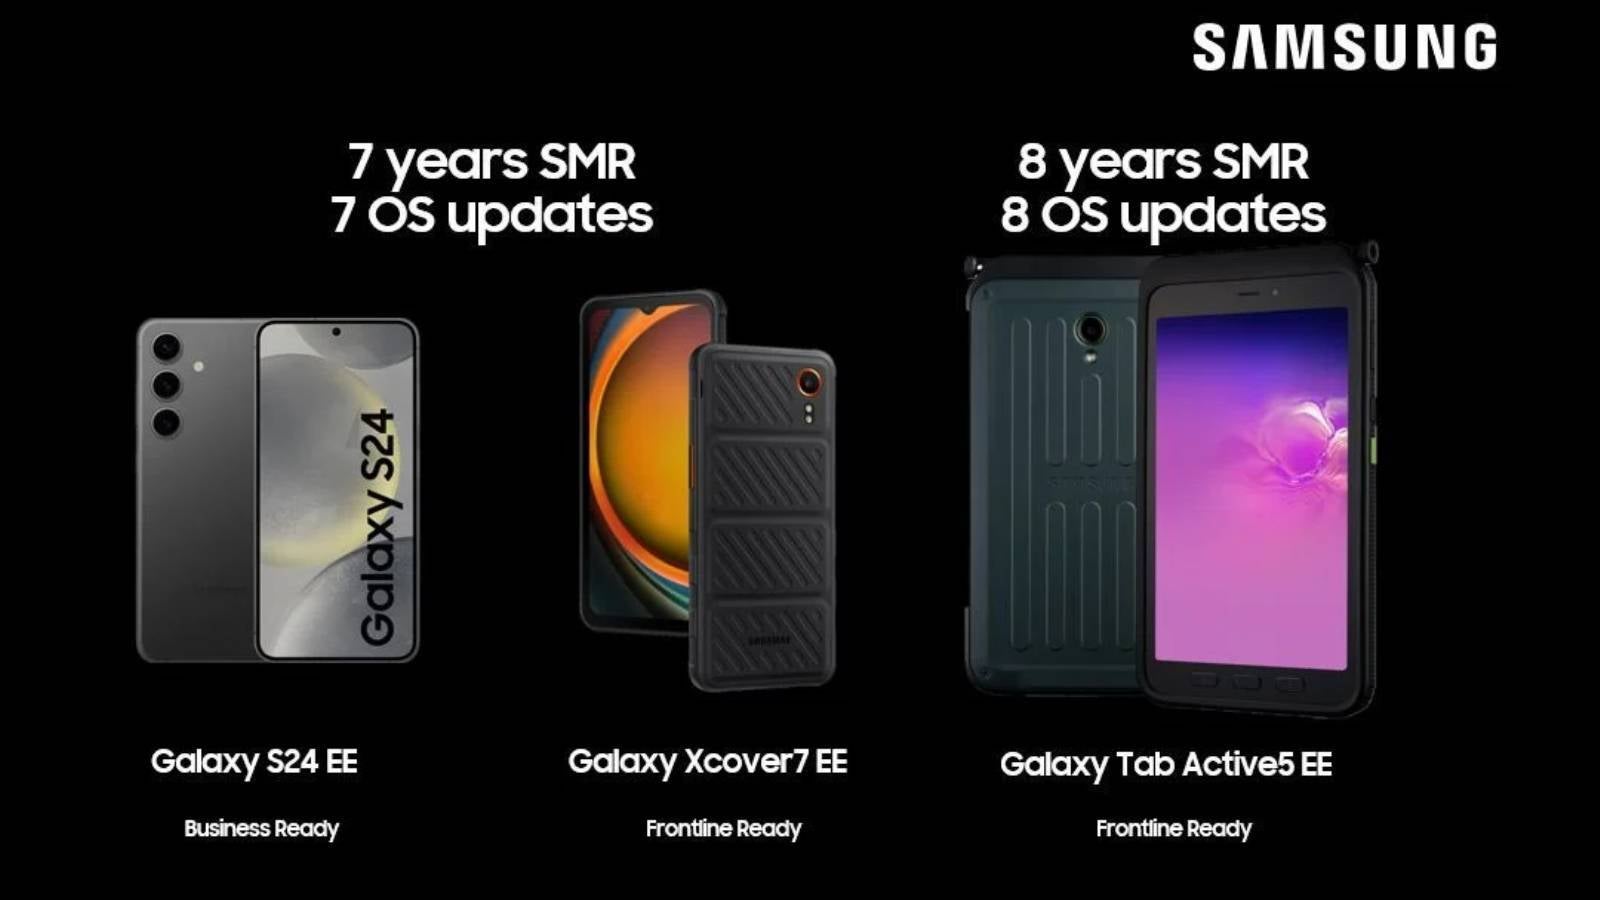 A LinkedIn post by a Samsung exec, which has been deleted, said the Galaxy Tab Active 5 enterprise edition will be supported for eight years - Samsung's new tablet promised more updates than Galaxy S24 in now-deleted post